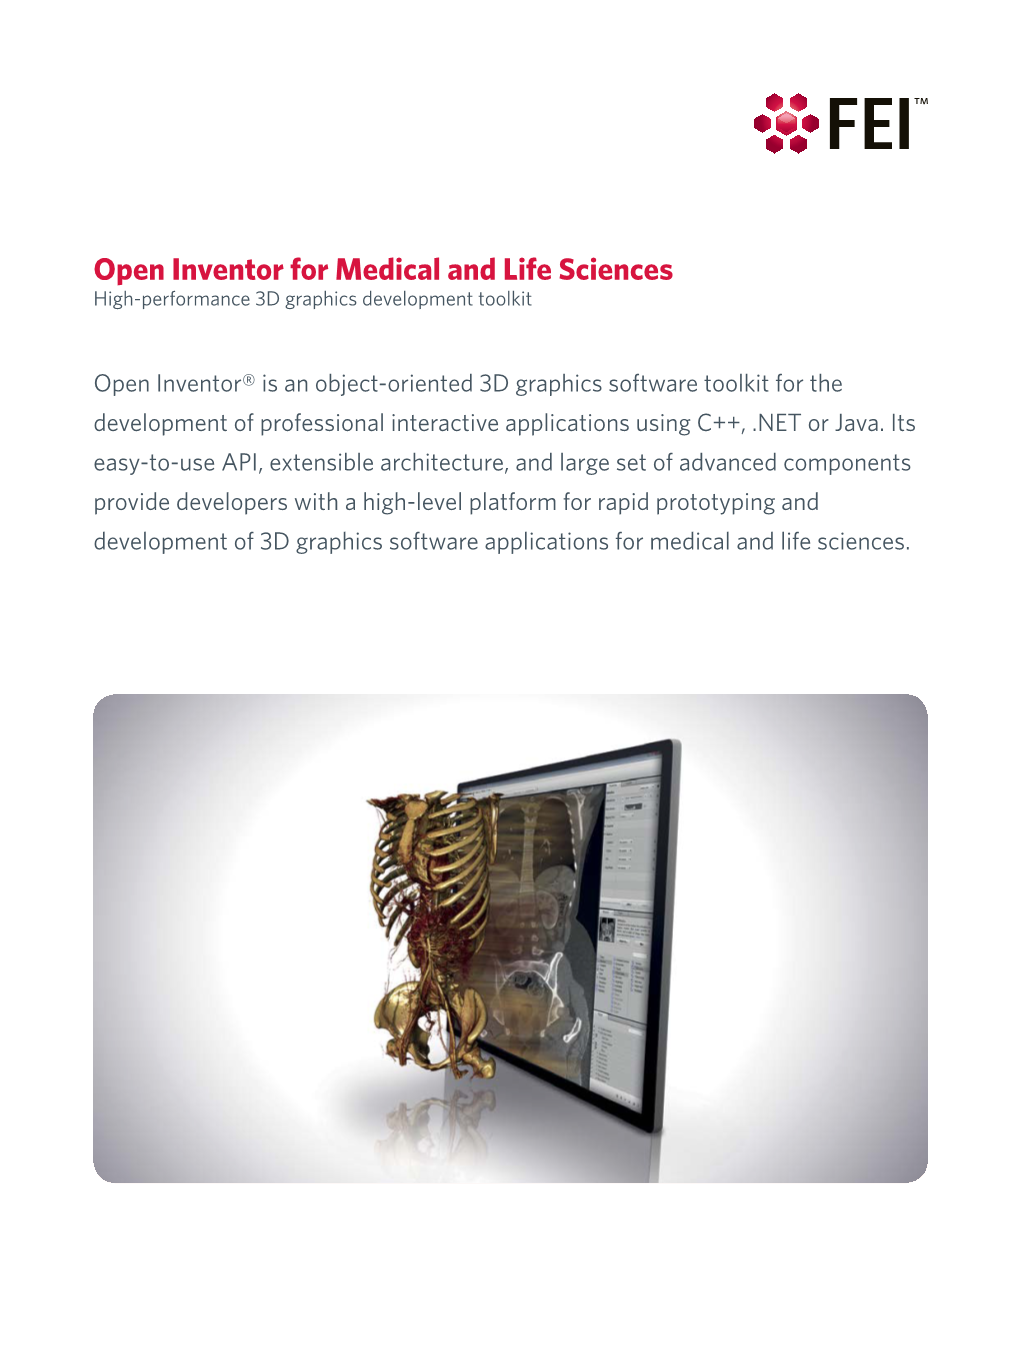 Open Inventor 3D Software Development Toolkit for Medical And